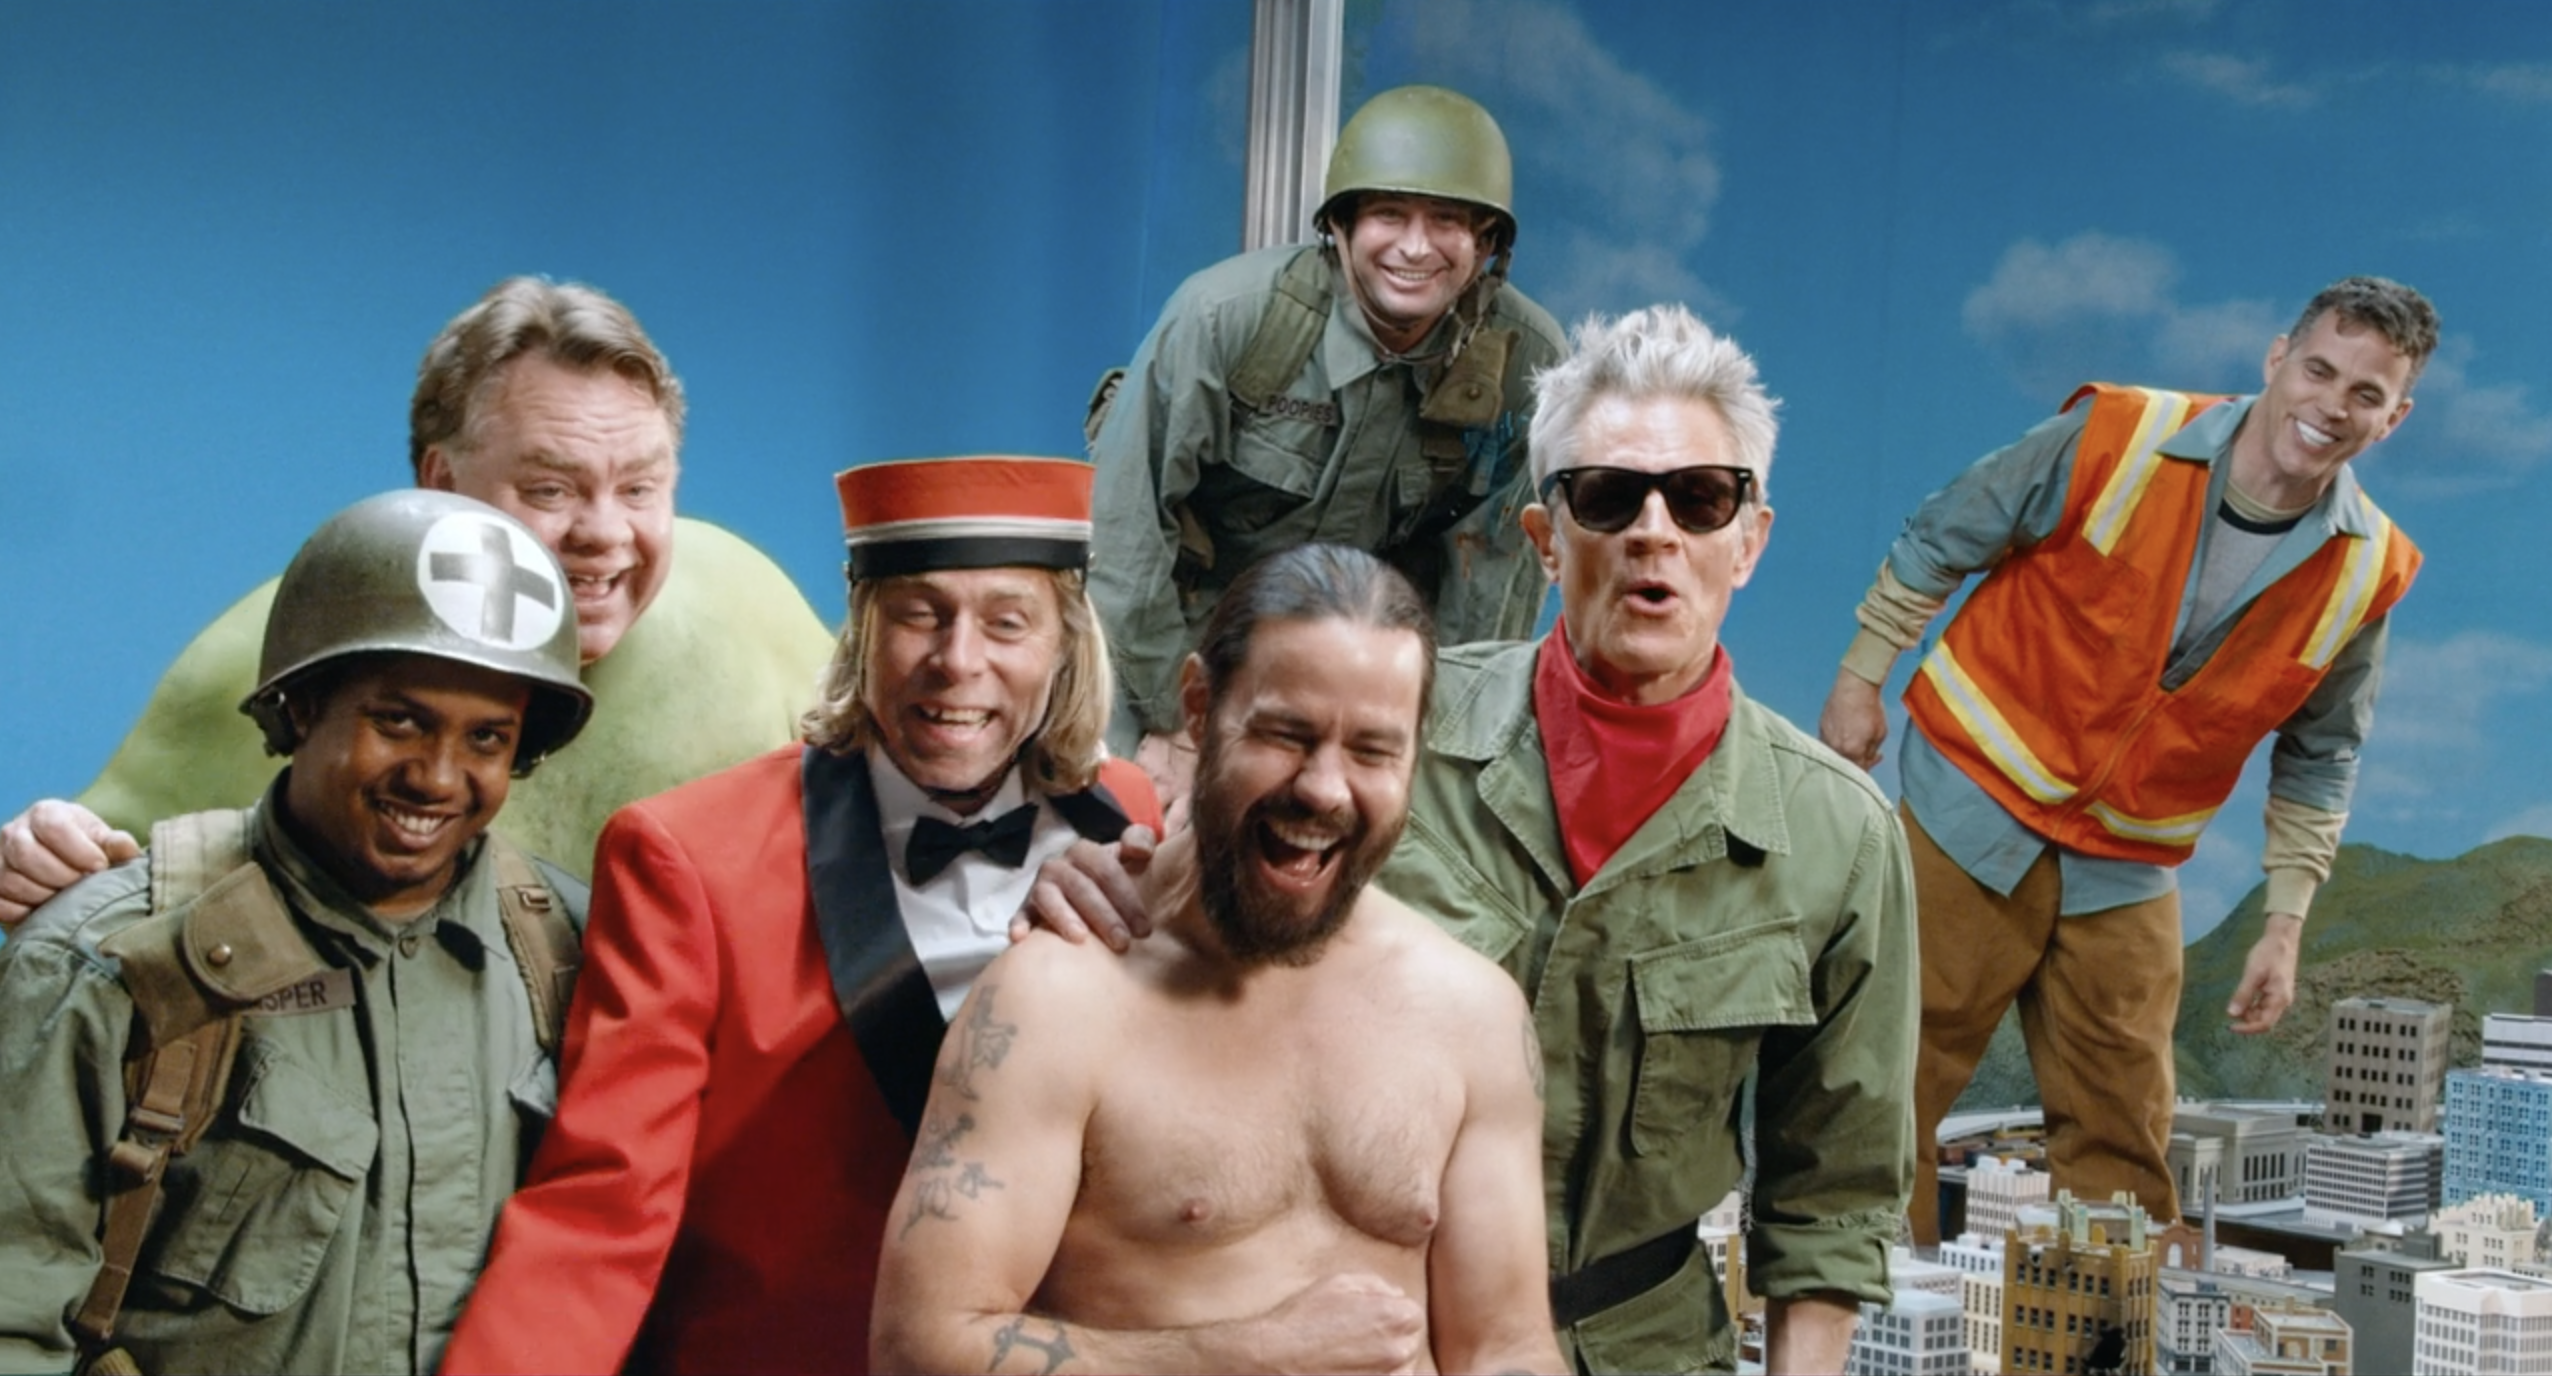 Johnny Knoxville And Jeff Tremaine Talk Stunts And Reunions For Jackass Forever [Exclusive Interview]